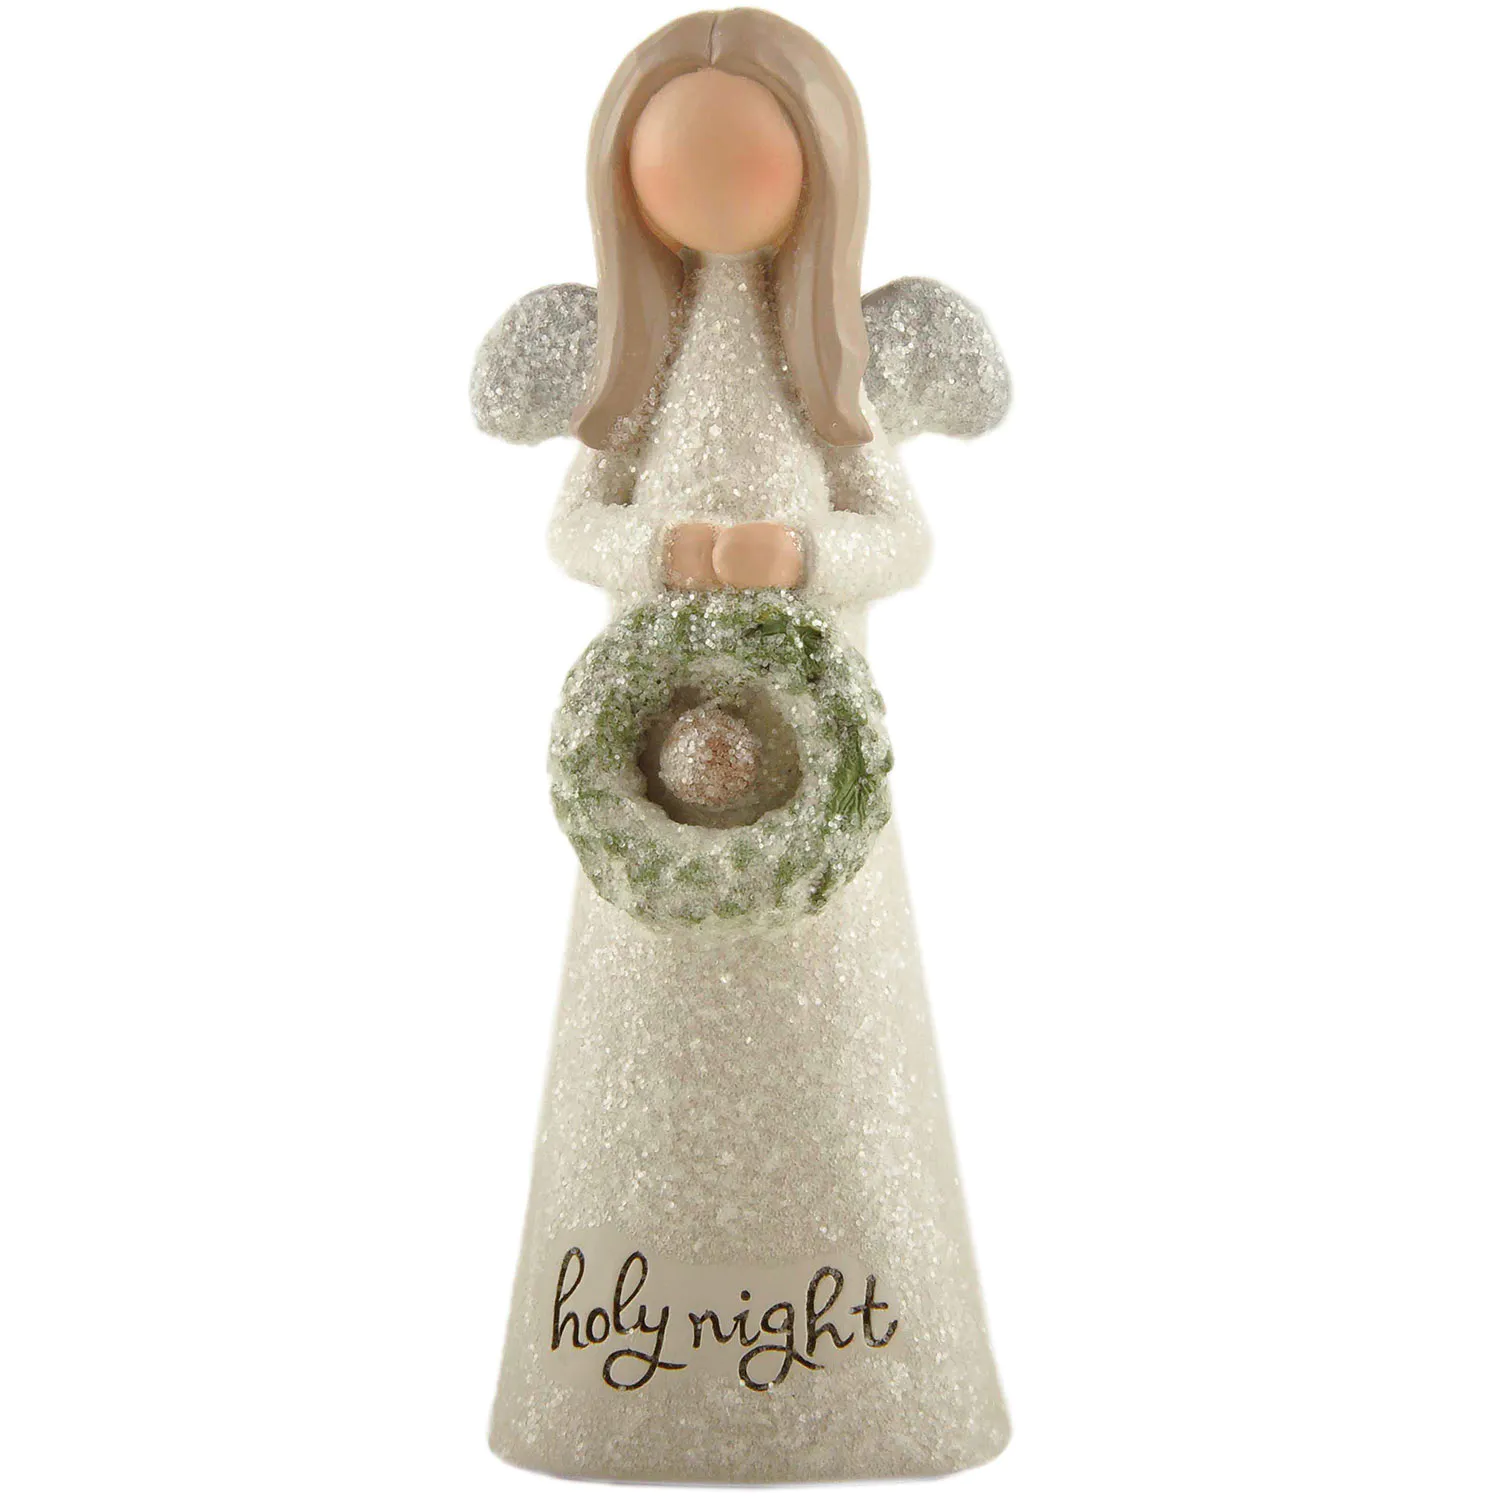 Embracing the Spirit of Christmas A Glittering Resin Angel Figurine Proclaiming 'Holy Night’ for Home Decor 238-13926